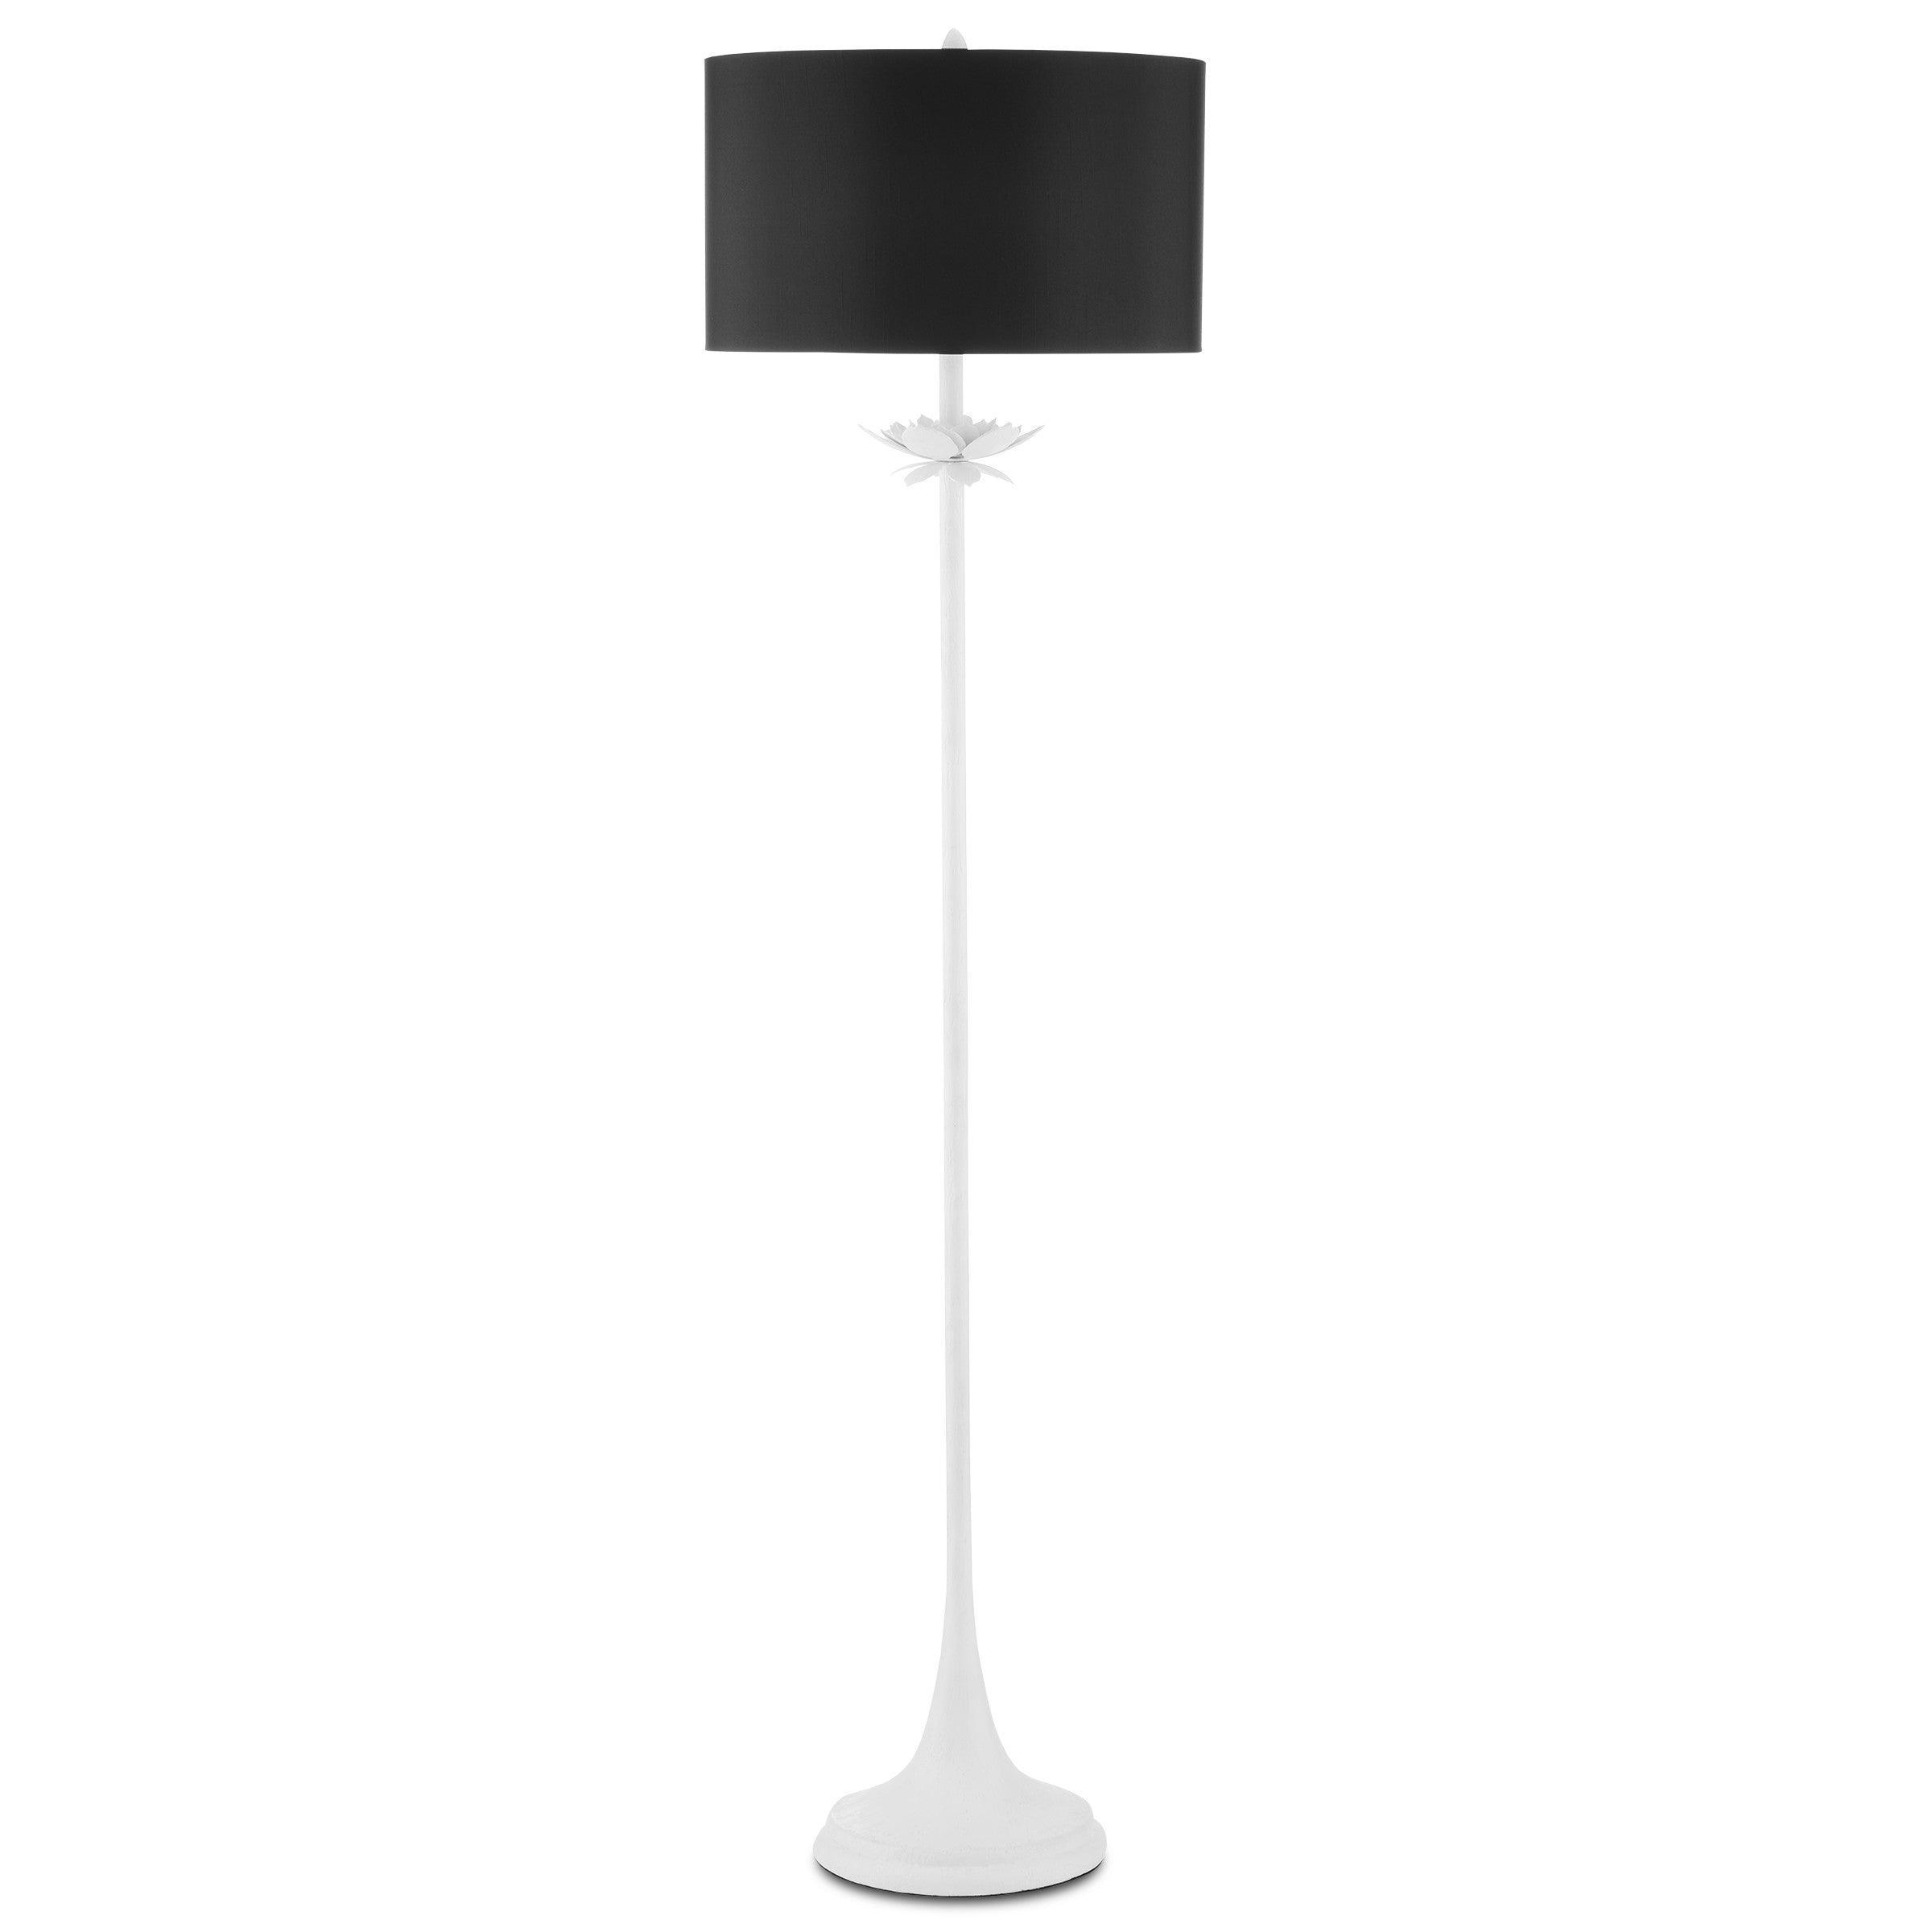 Currey and Company - Bexhill Floor Lamp - 8000-0115 | Montreal Lighting & Hardware